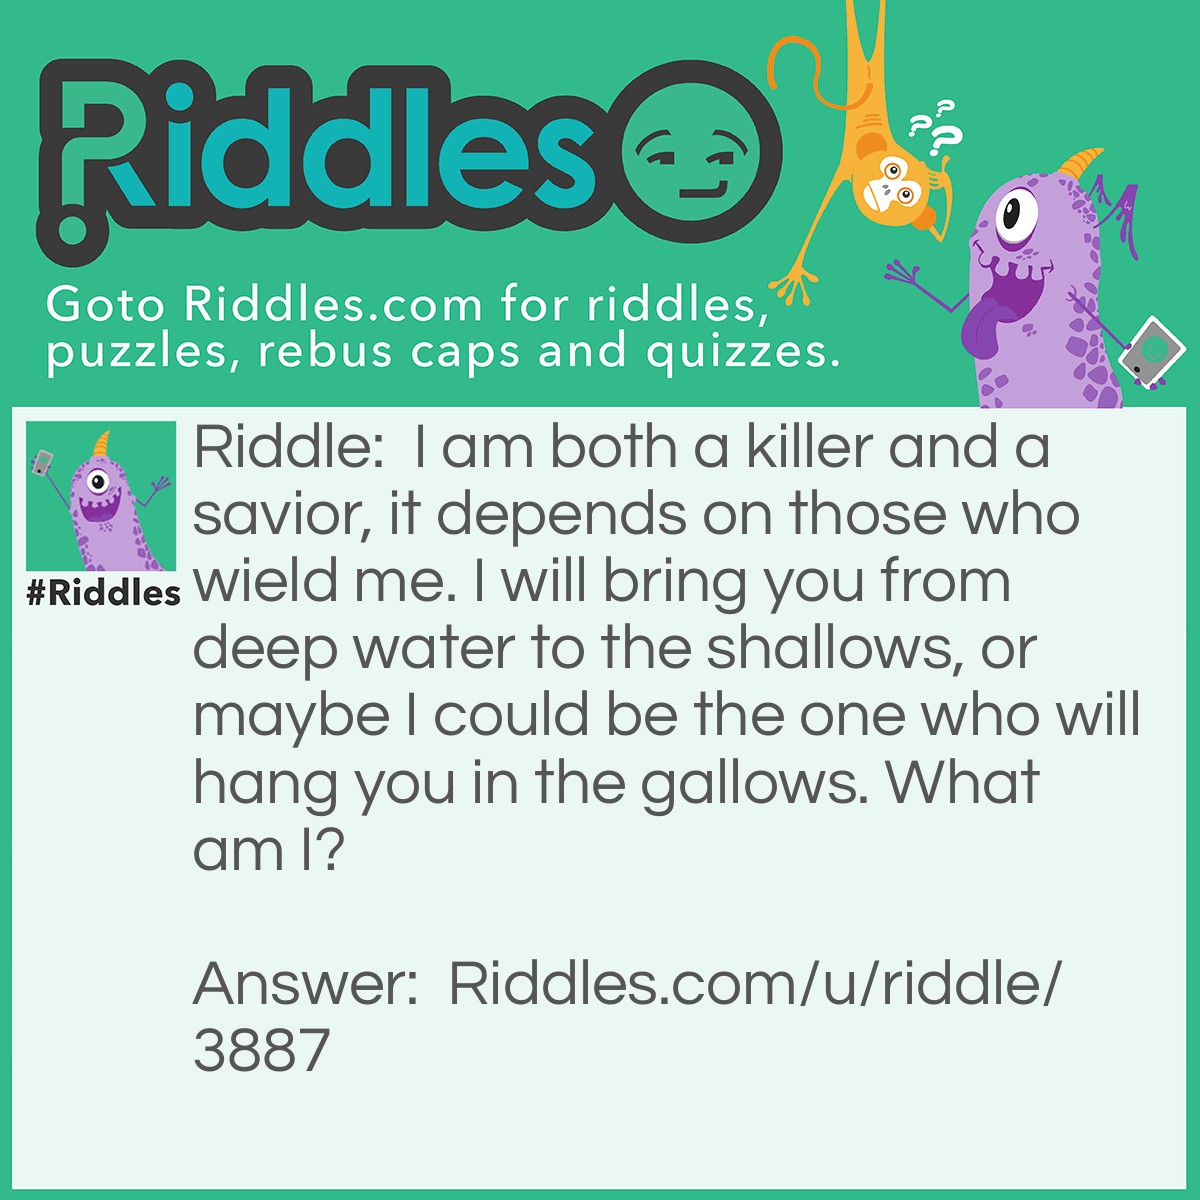 Riddle: I am both a killer and a savior, it depends on those who wield me. I will bring you from deep water to the shallows, or maybe I could be the one who will hang you in the gallows. What am I? Answer: A rope.